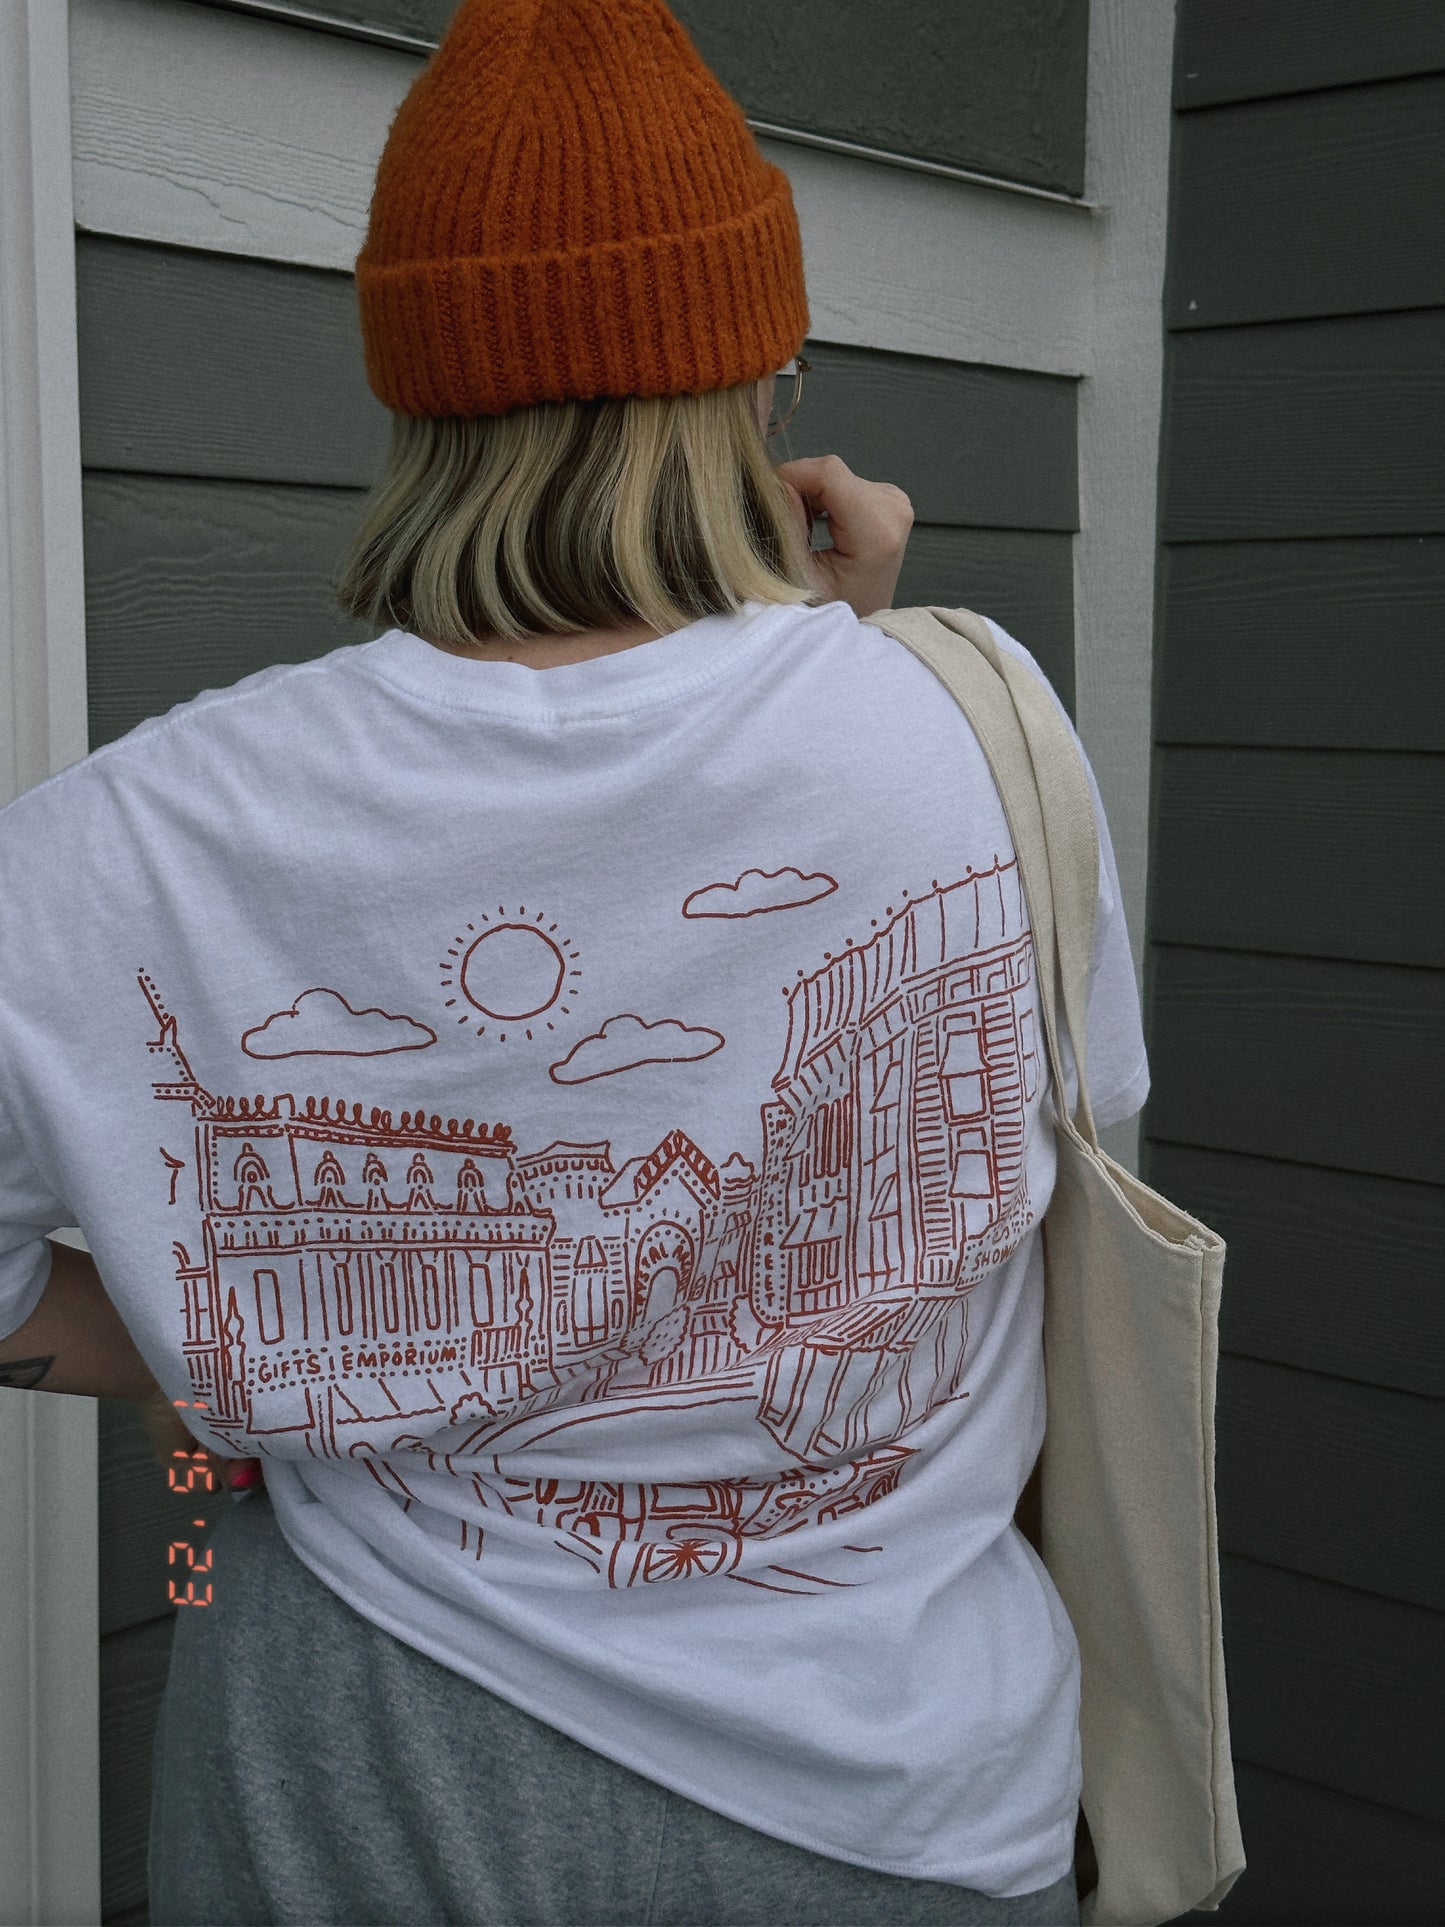 The Main Street Oversized Tee in White (NOT UPDATED STYLE)